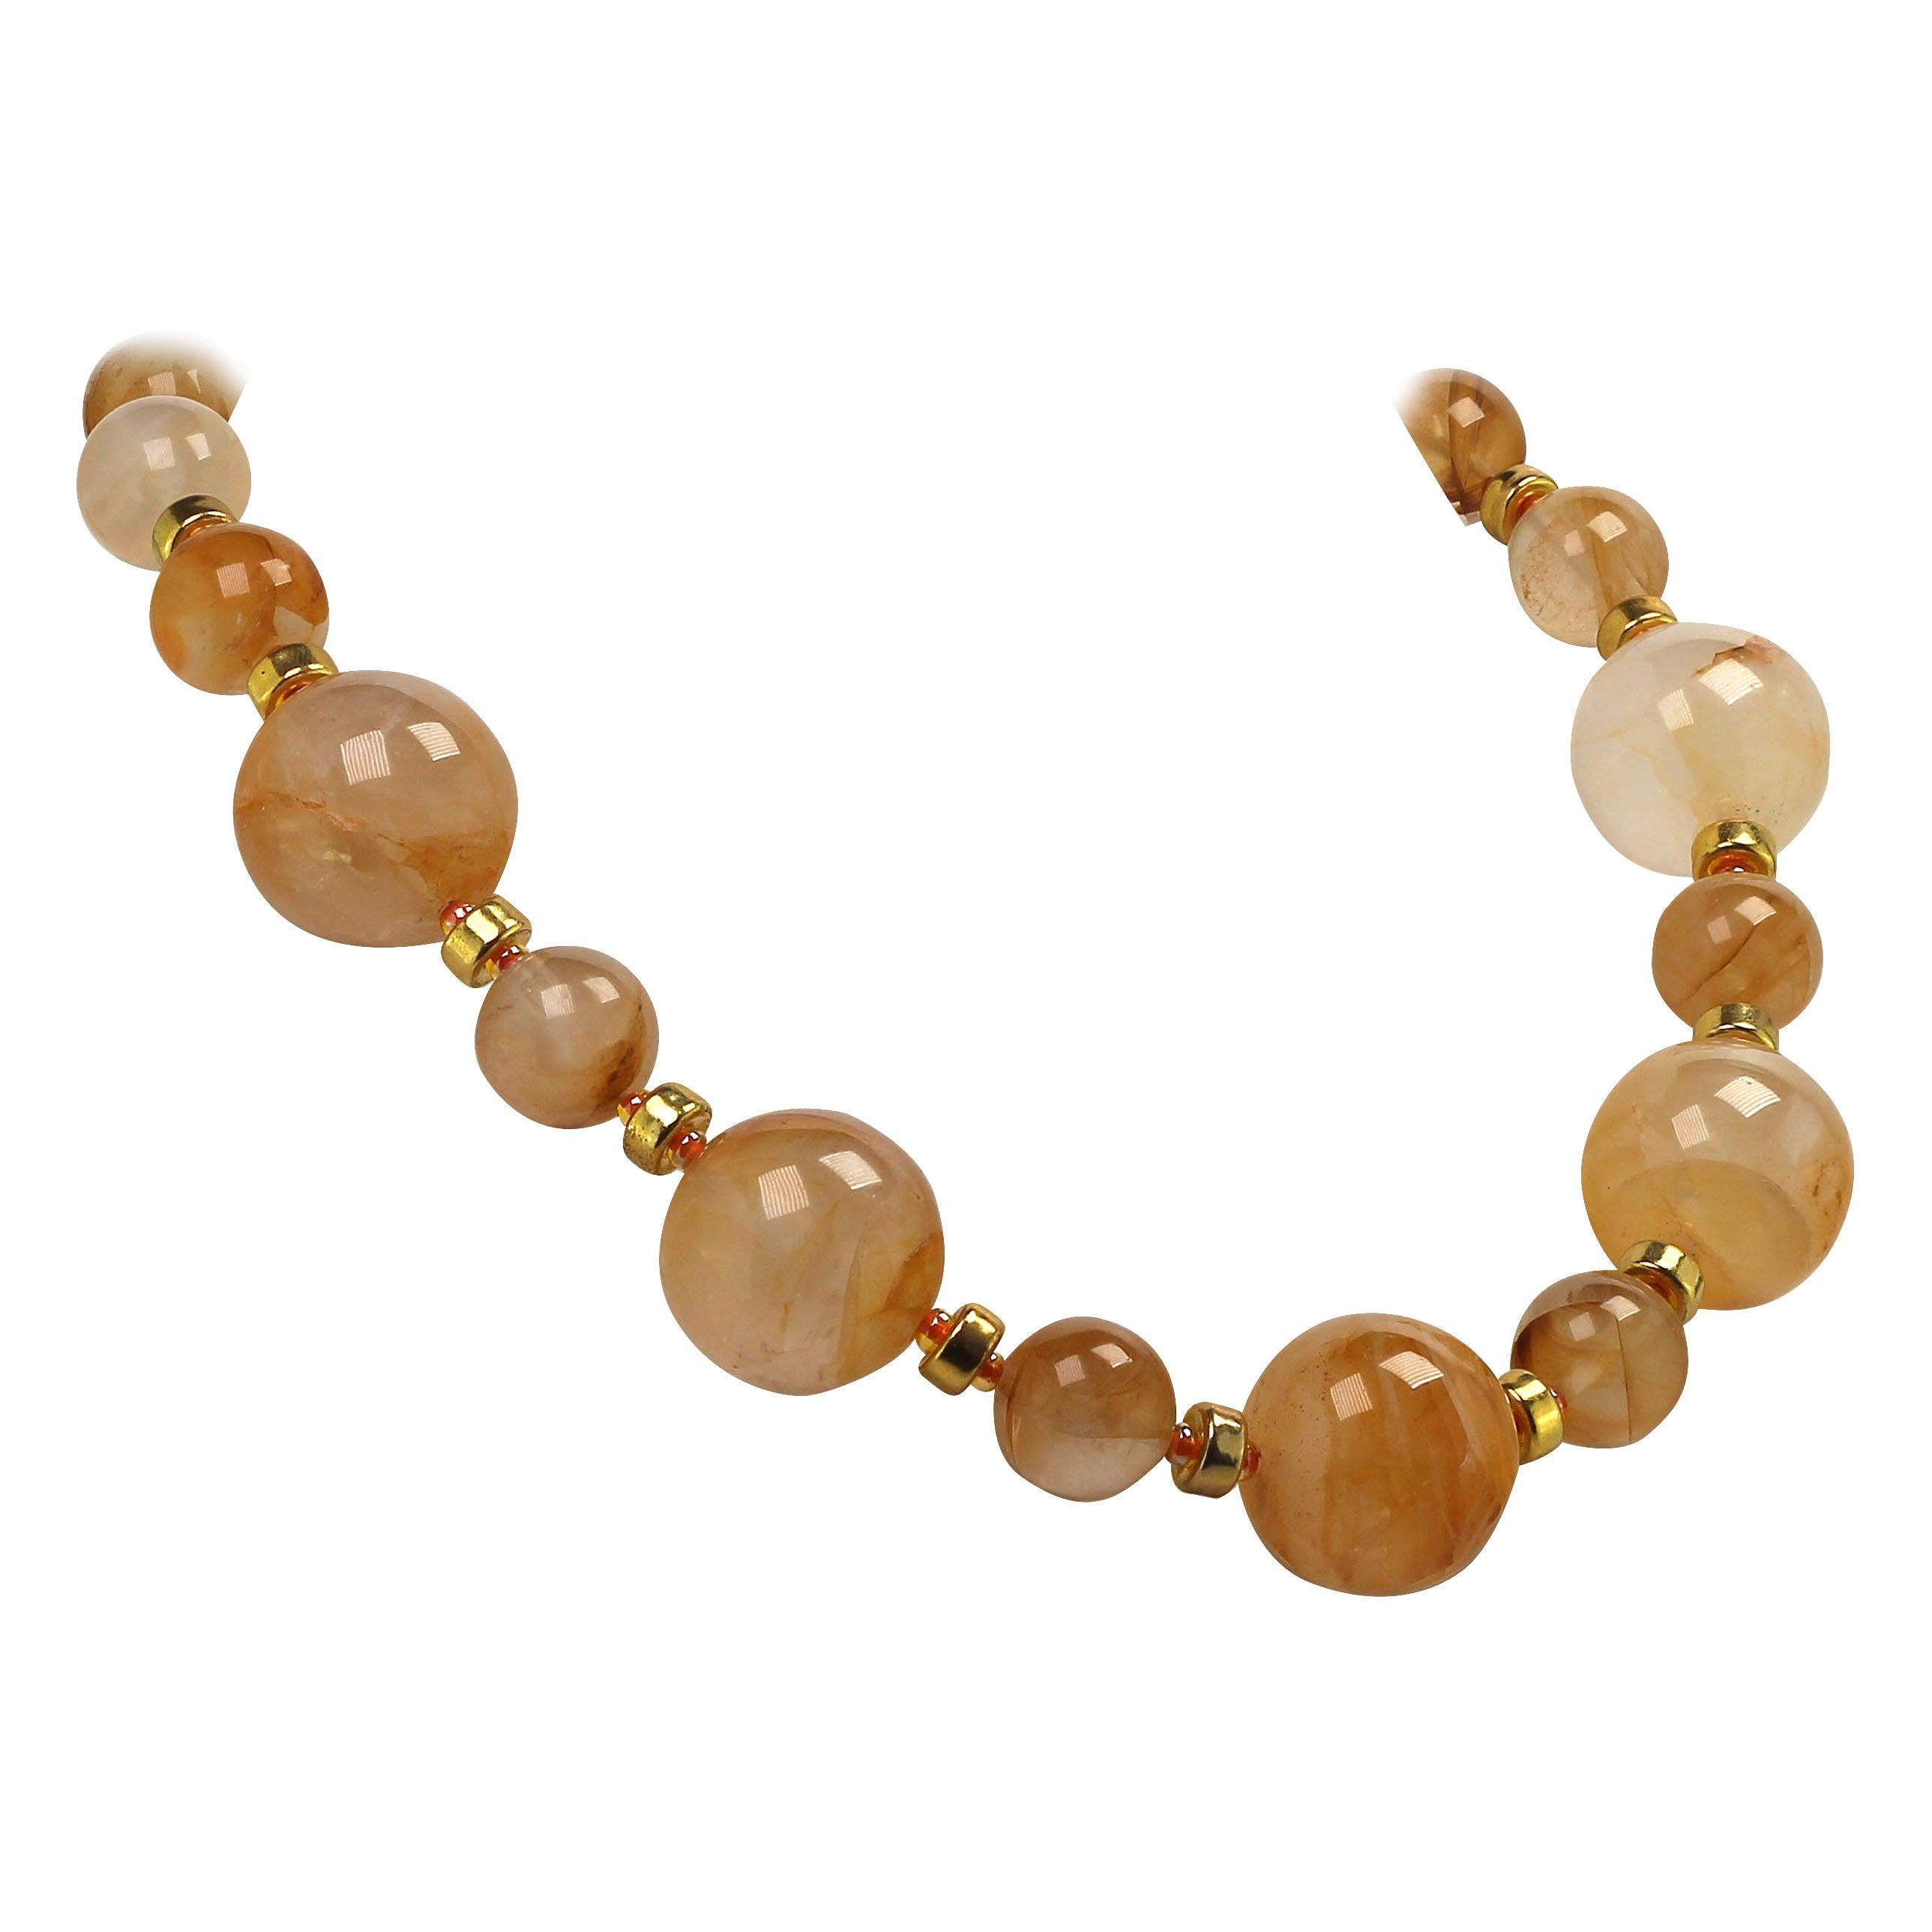 Magnificent Gold Quartz Necklace featuring two sizes of these incredible beads, 25 MM and 16 MM. Each bead is unique.  This custom made necklace features gold tone accents as well as orange Czech crystal beads and a vermeil toggle clasp.  This is a